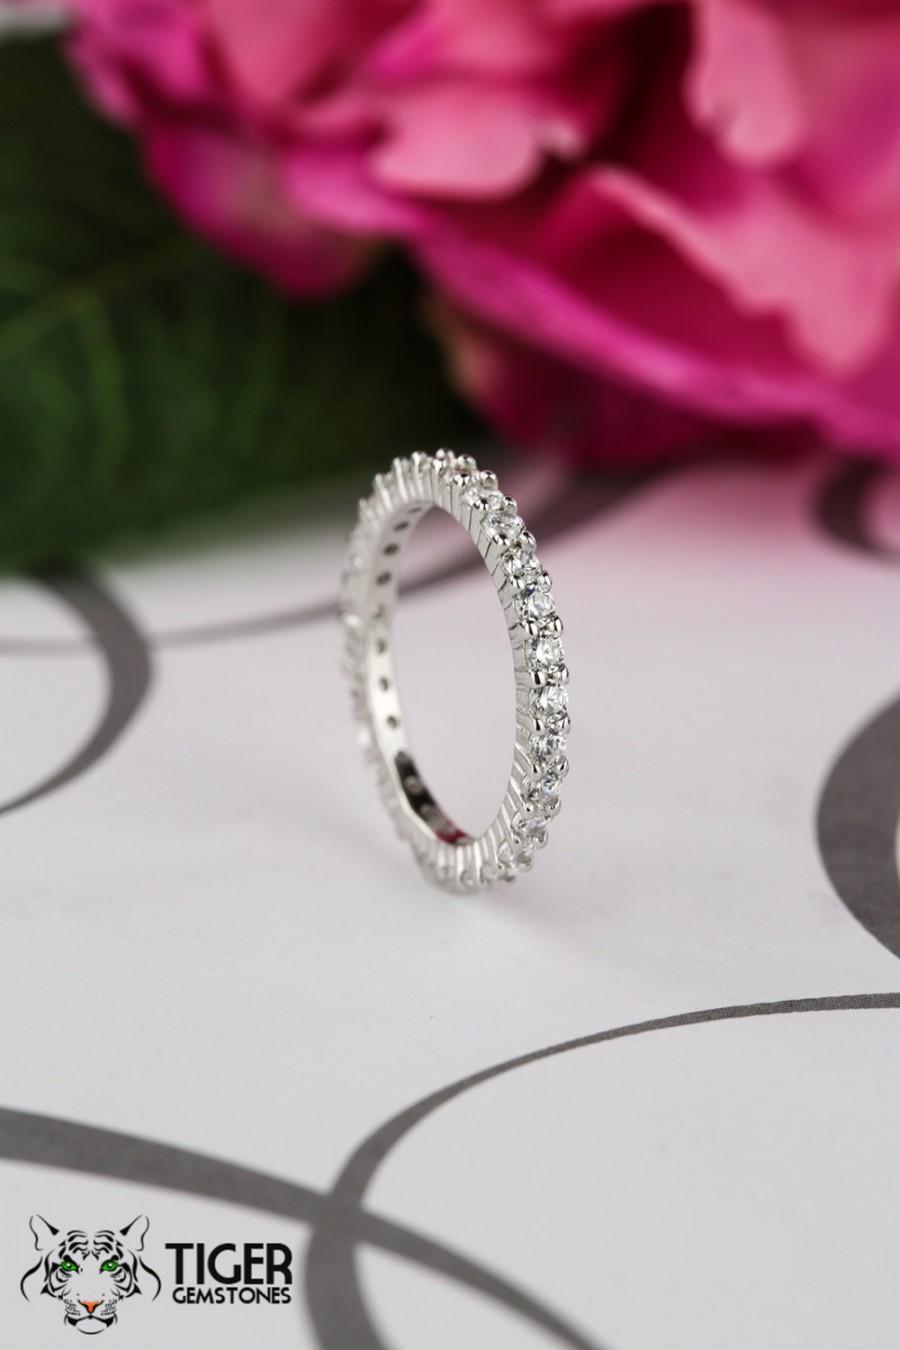 Mariage - 1 ctw Eternity Band, 2mm Wedding Band, Engagement Ring, Man Made Diamond Simulant, Bridal Ring, Sterling Silver, Promise Ring, Wedding Ring